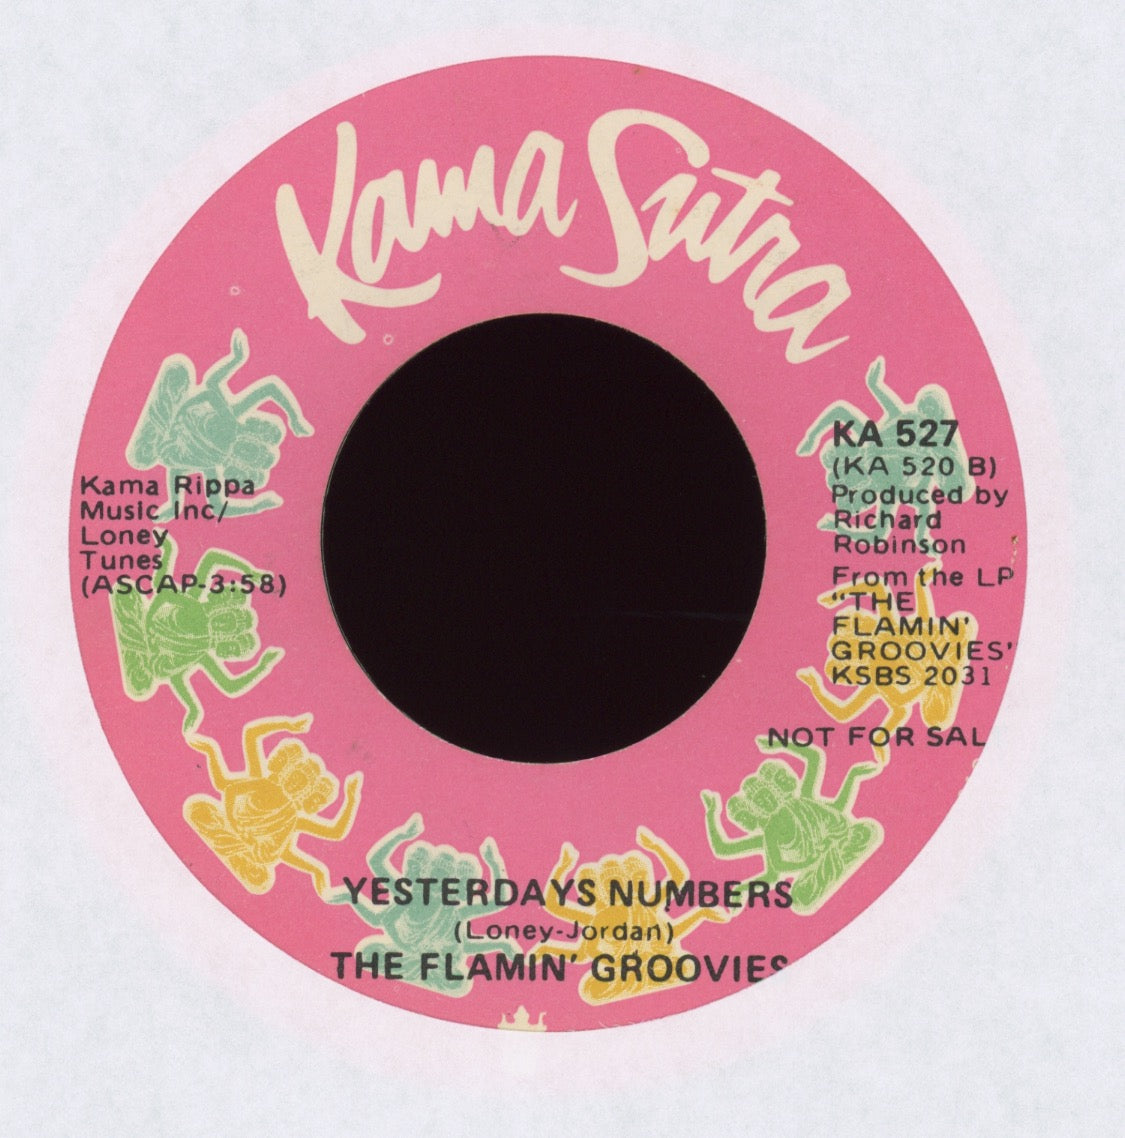 The Flamin' Groovies - Have You Seen My Baby? on Kama Sutra Promo